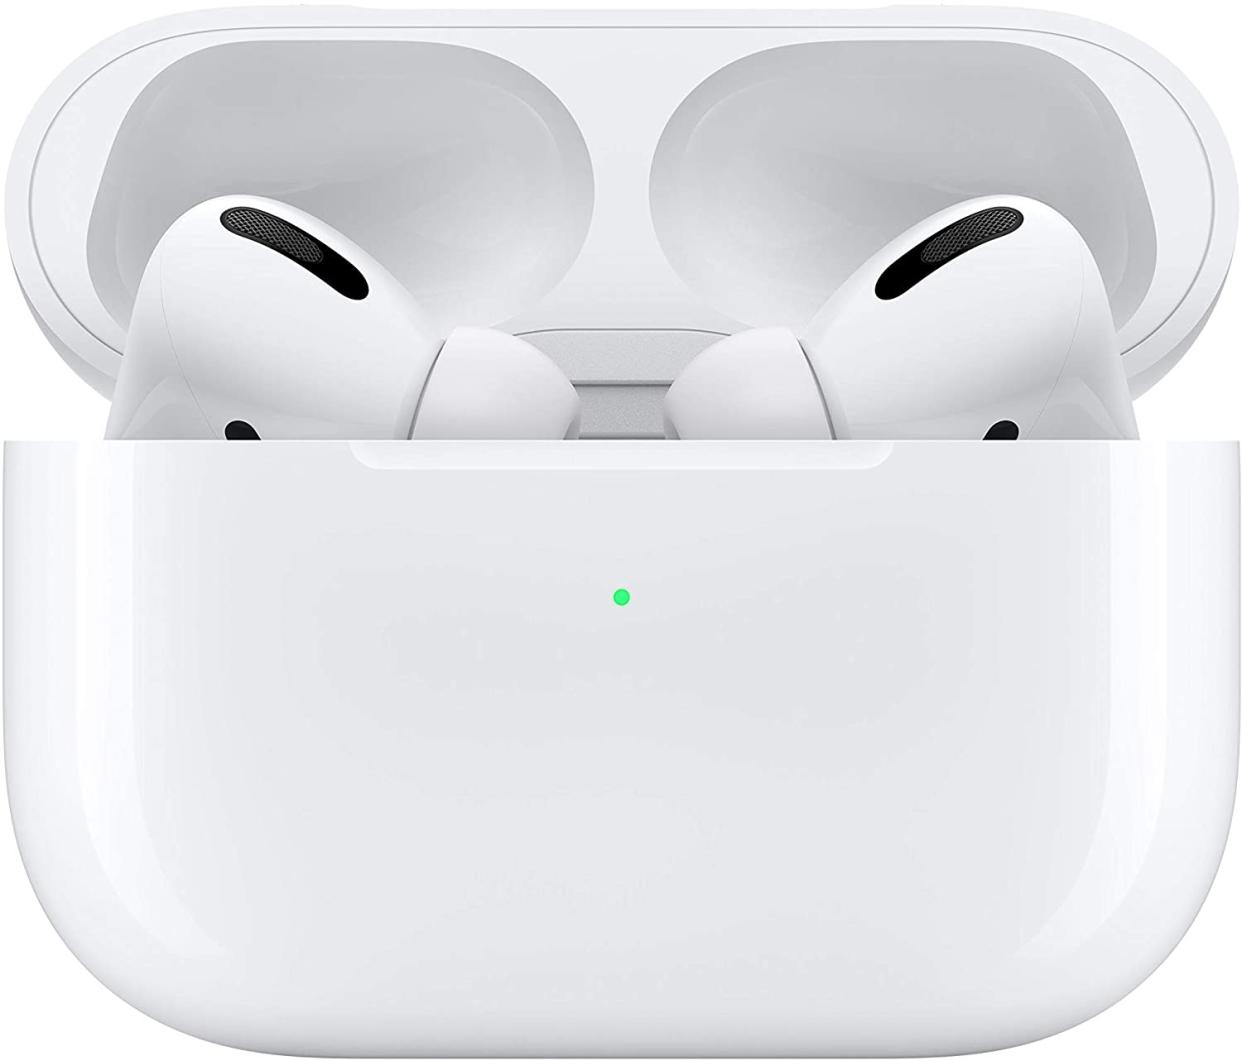 Grab a new pair of AirPods on sale for Black Friday. (Photo: Amazon)